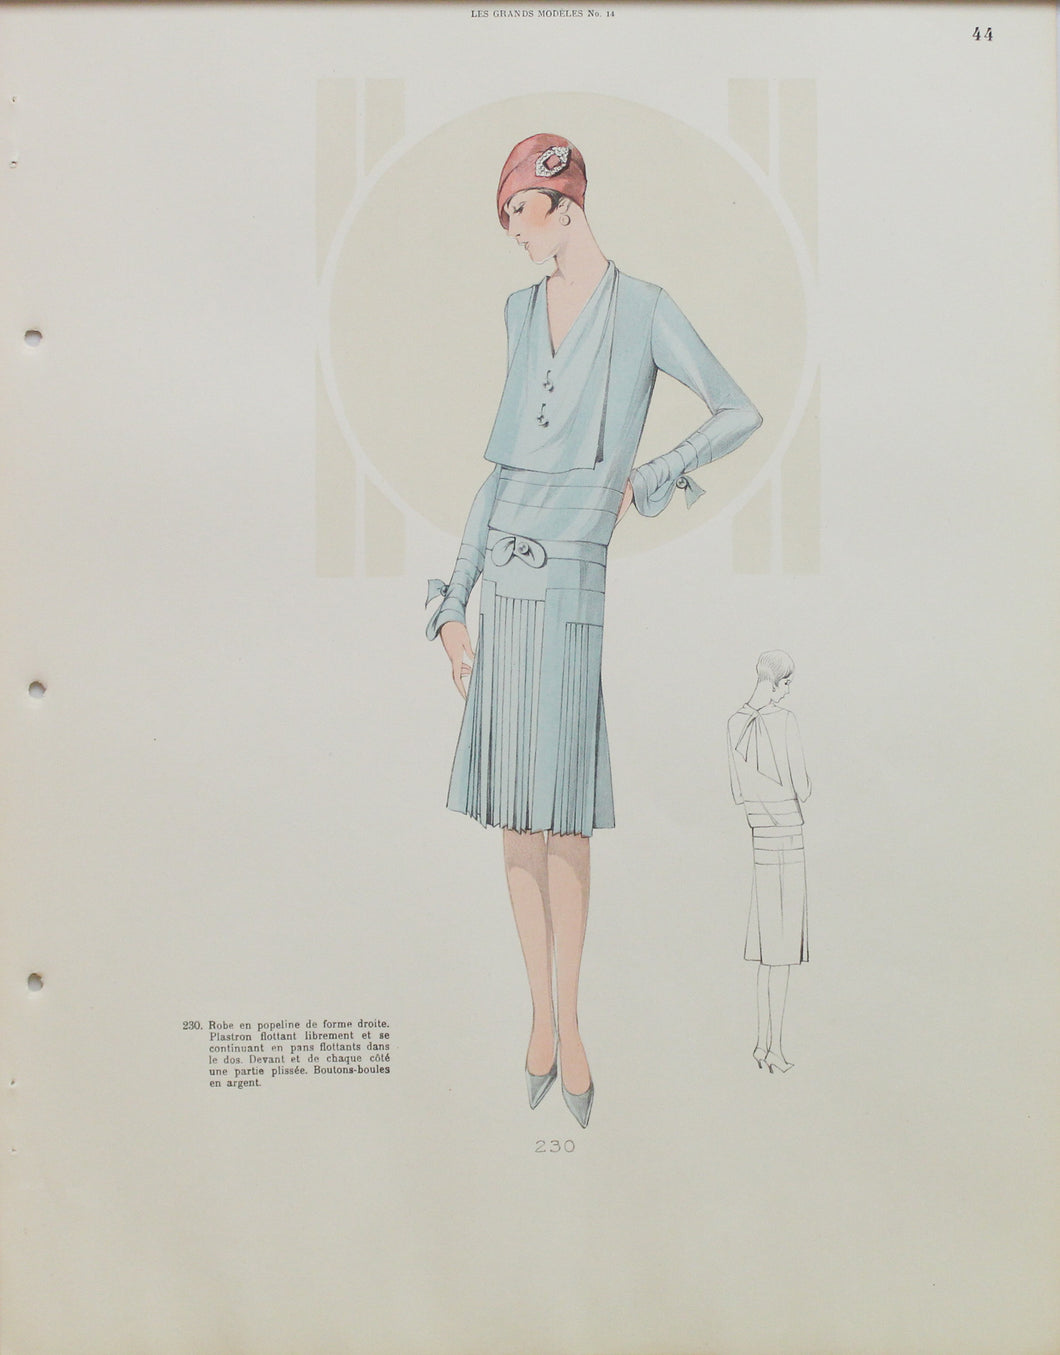 Fashion, Les Grands Models, #14, Page 44, Outfit 230, 1920 - 1929